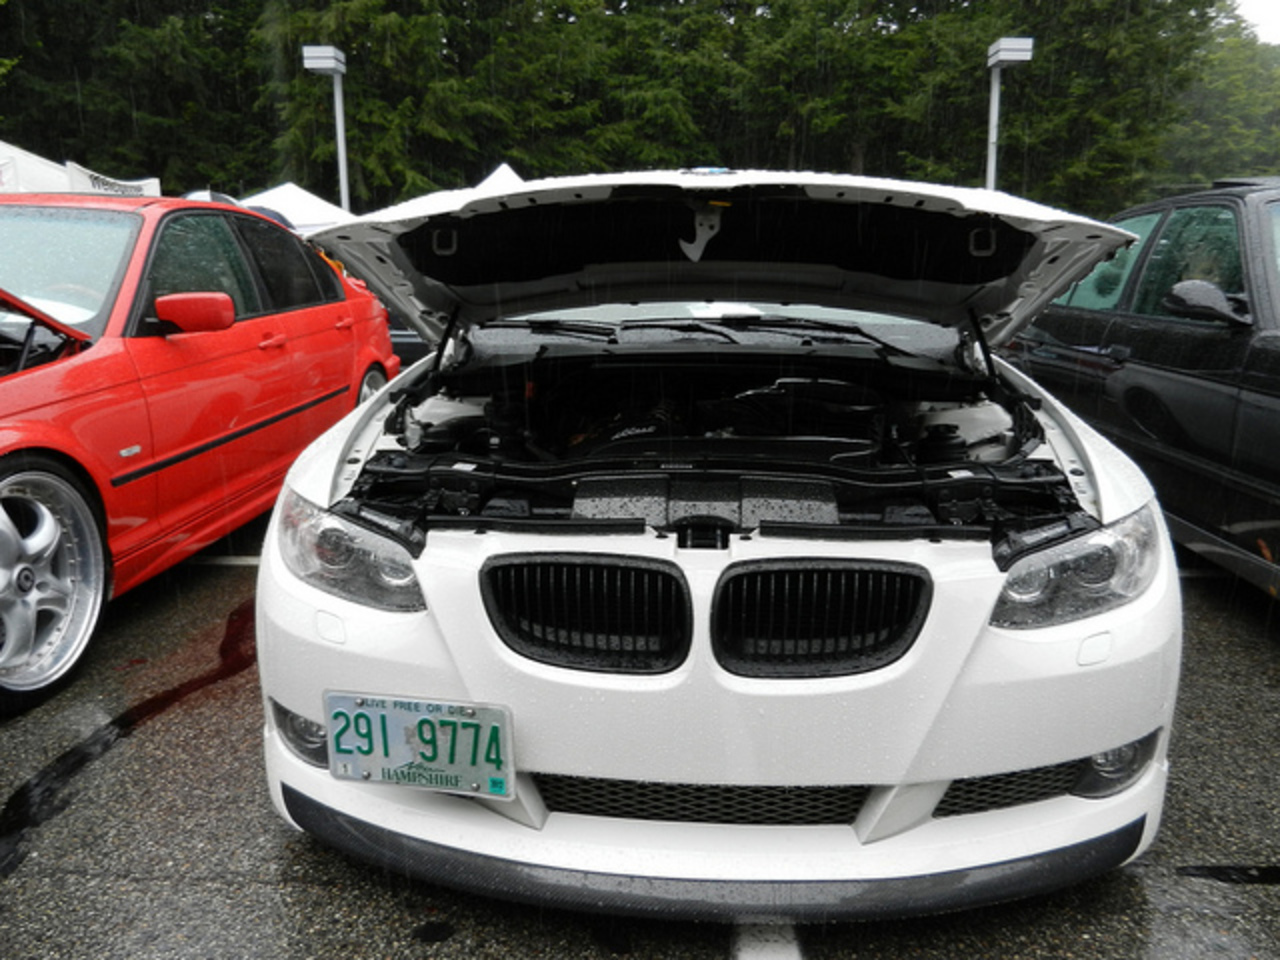 White BMW 335i Coupe with AC Schnitzer parts | Flickr - Photo Sharing!